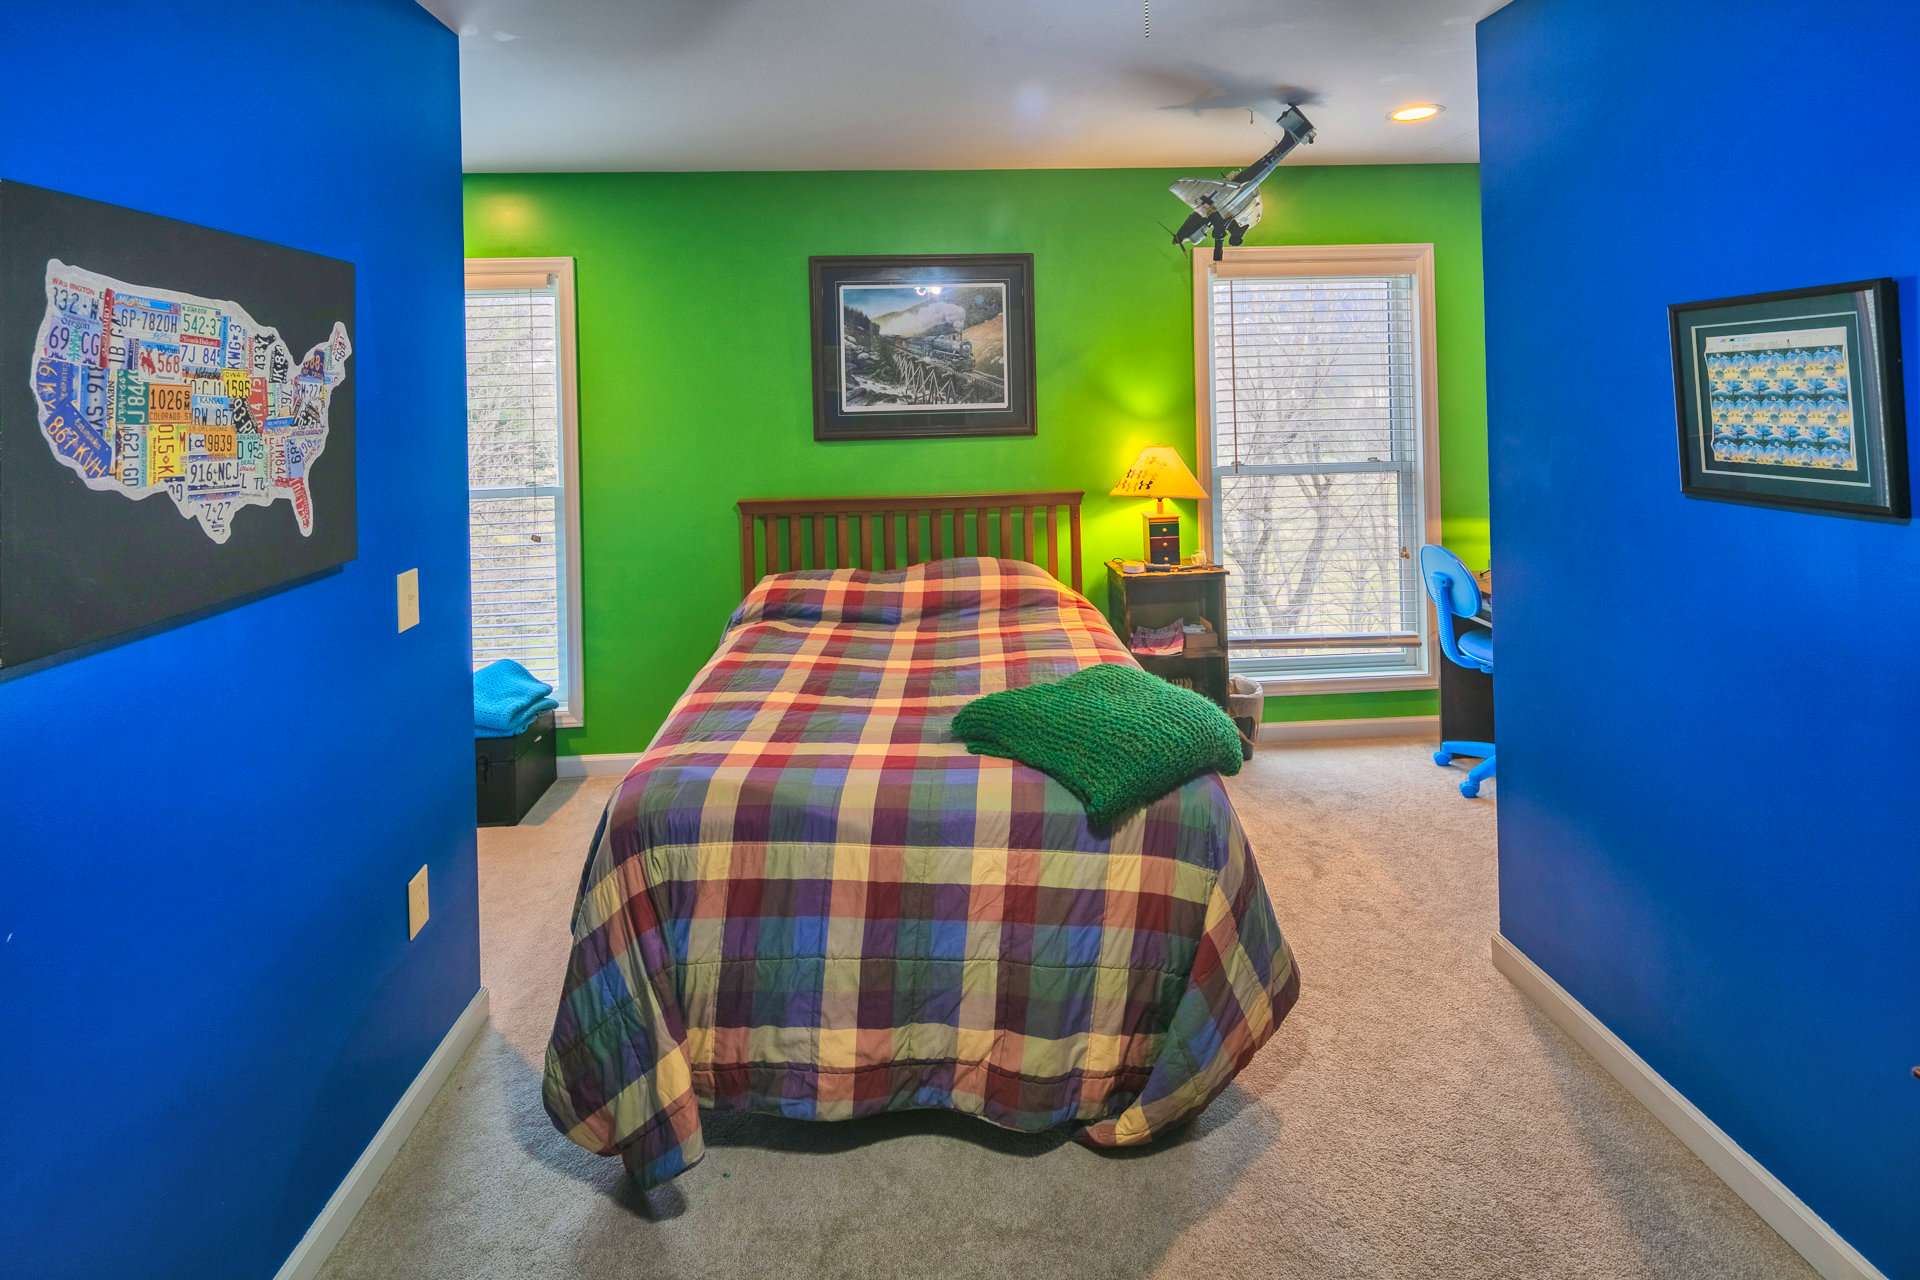 The bonus room on the upper level provides a great option for a home office, play room, hobby room, or additional sleeping space.